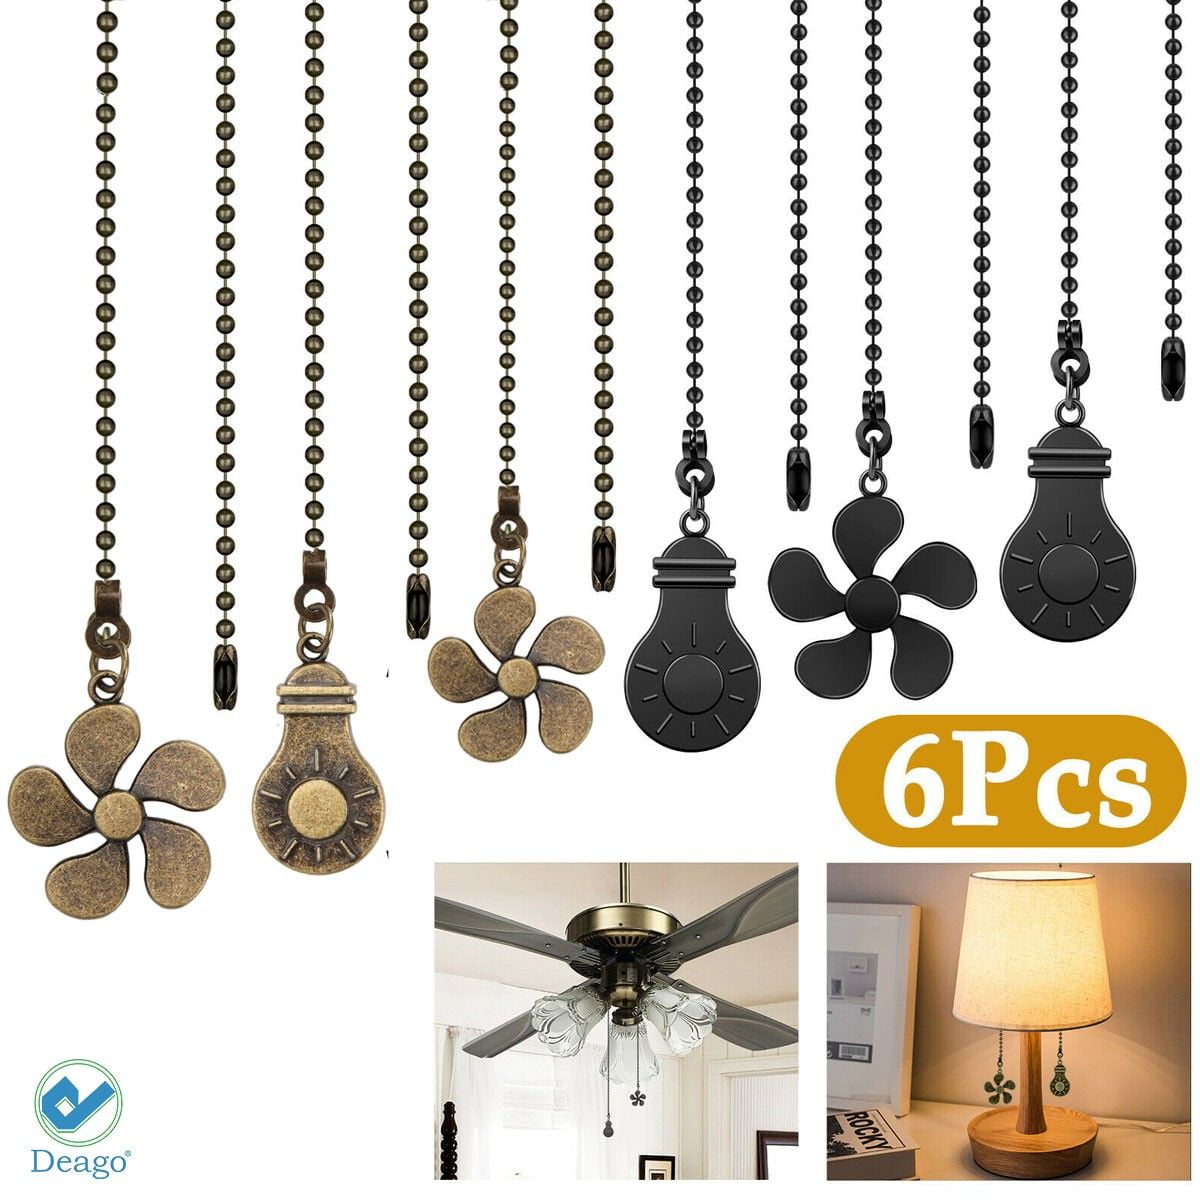 4Pcs _Retro Wooden Ceiling Fan Lamp Chain Pulls Extension with Connector 30cm 